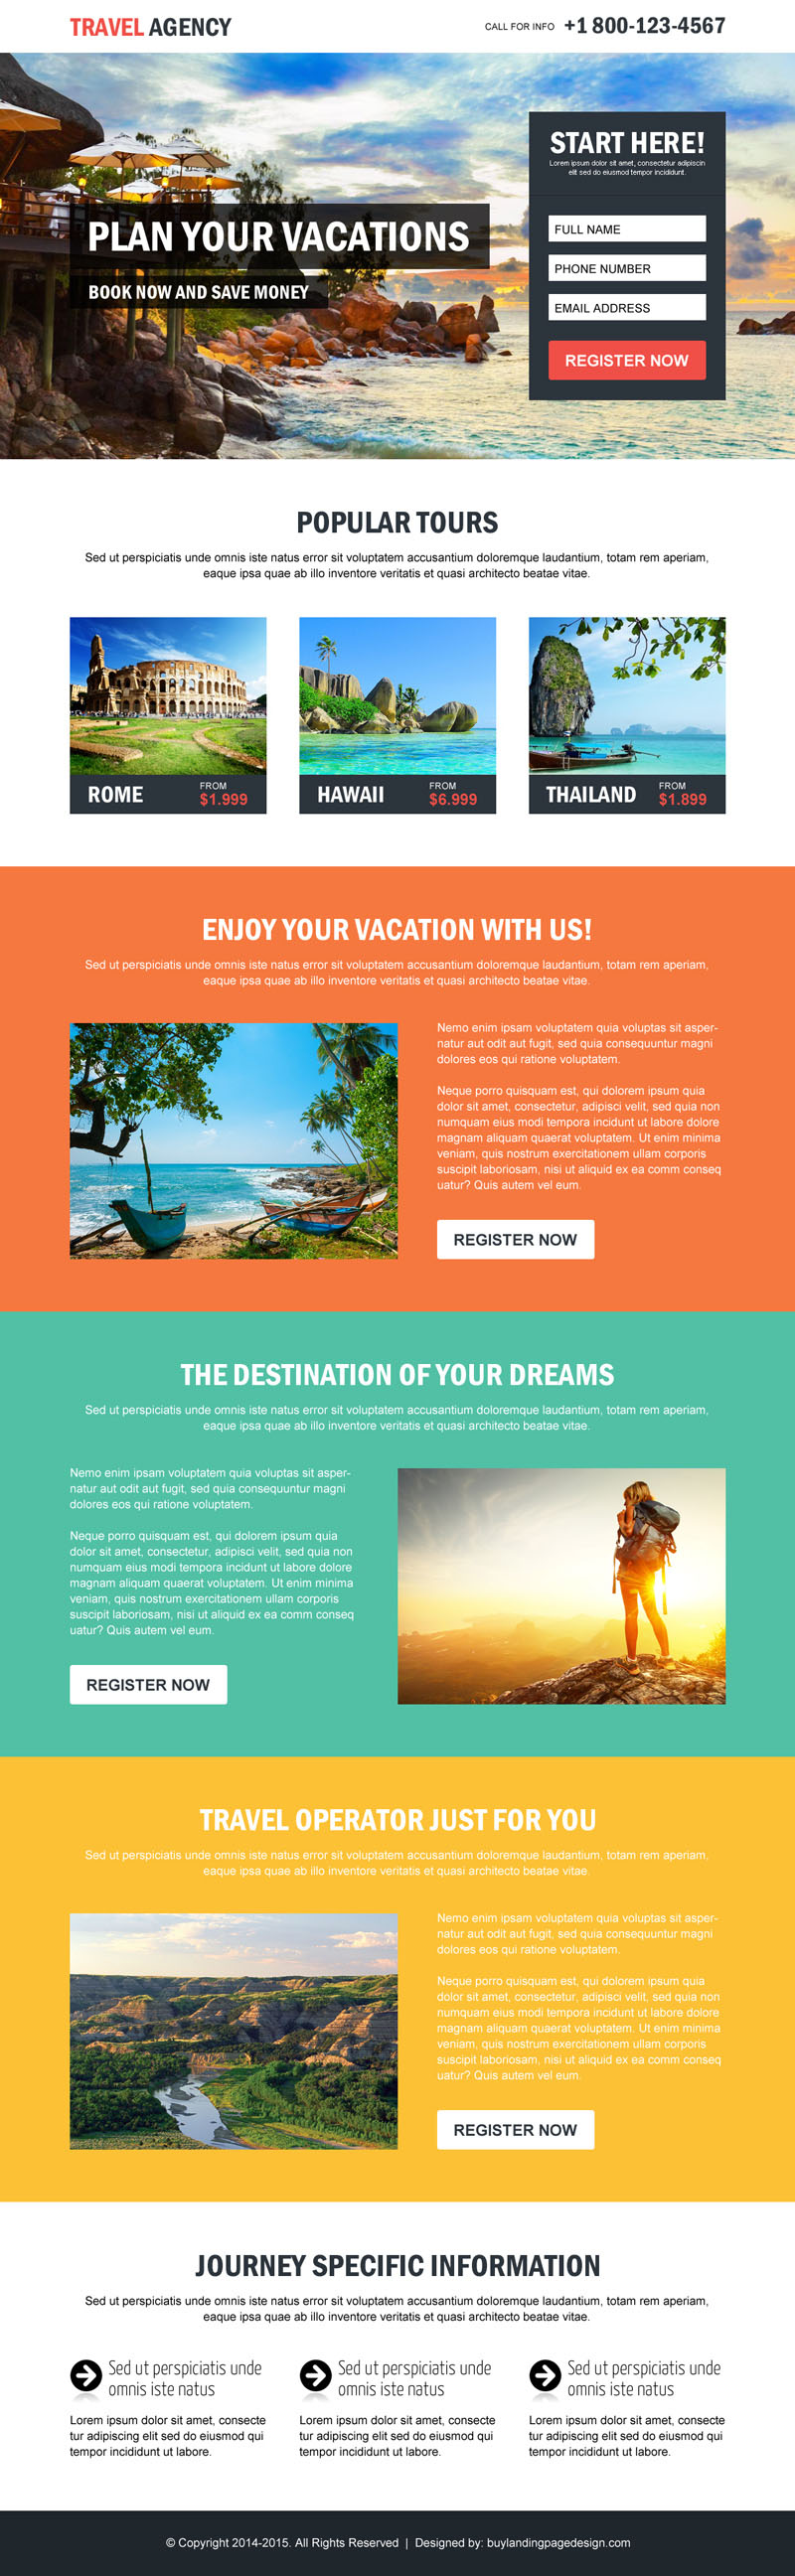 travel-agency-plan-your-vacations-lead-capture-optimized-landing-page-design-template-006